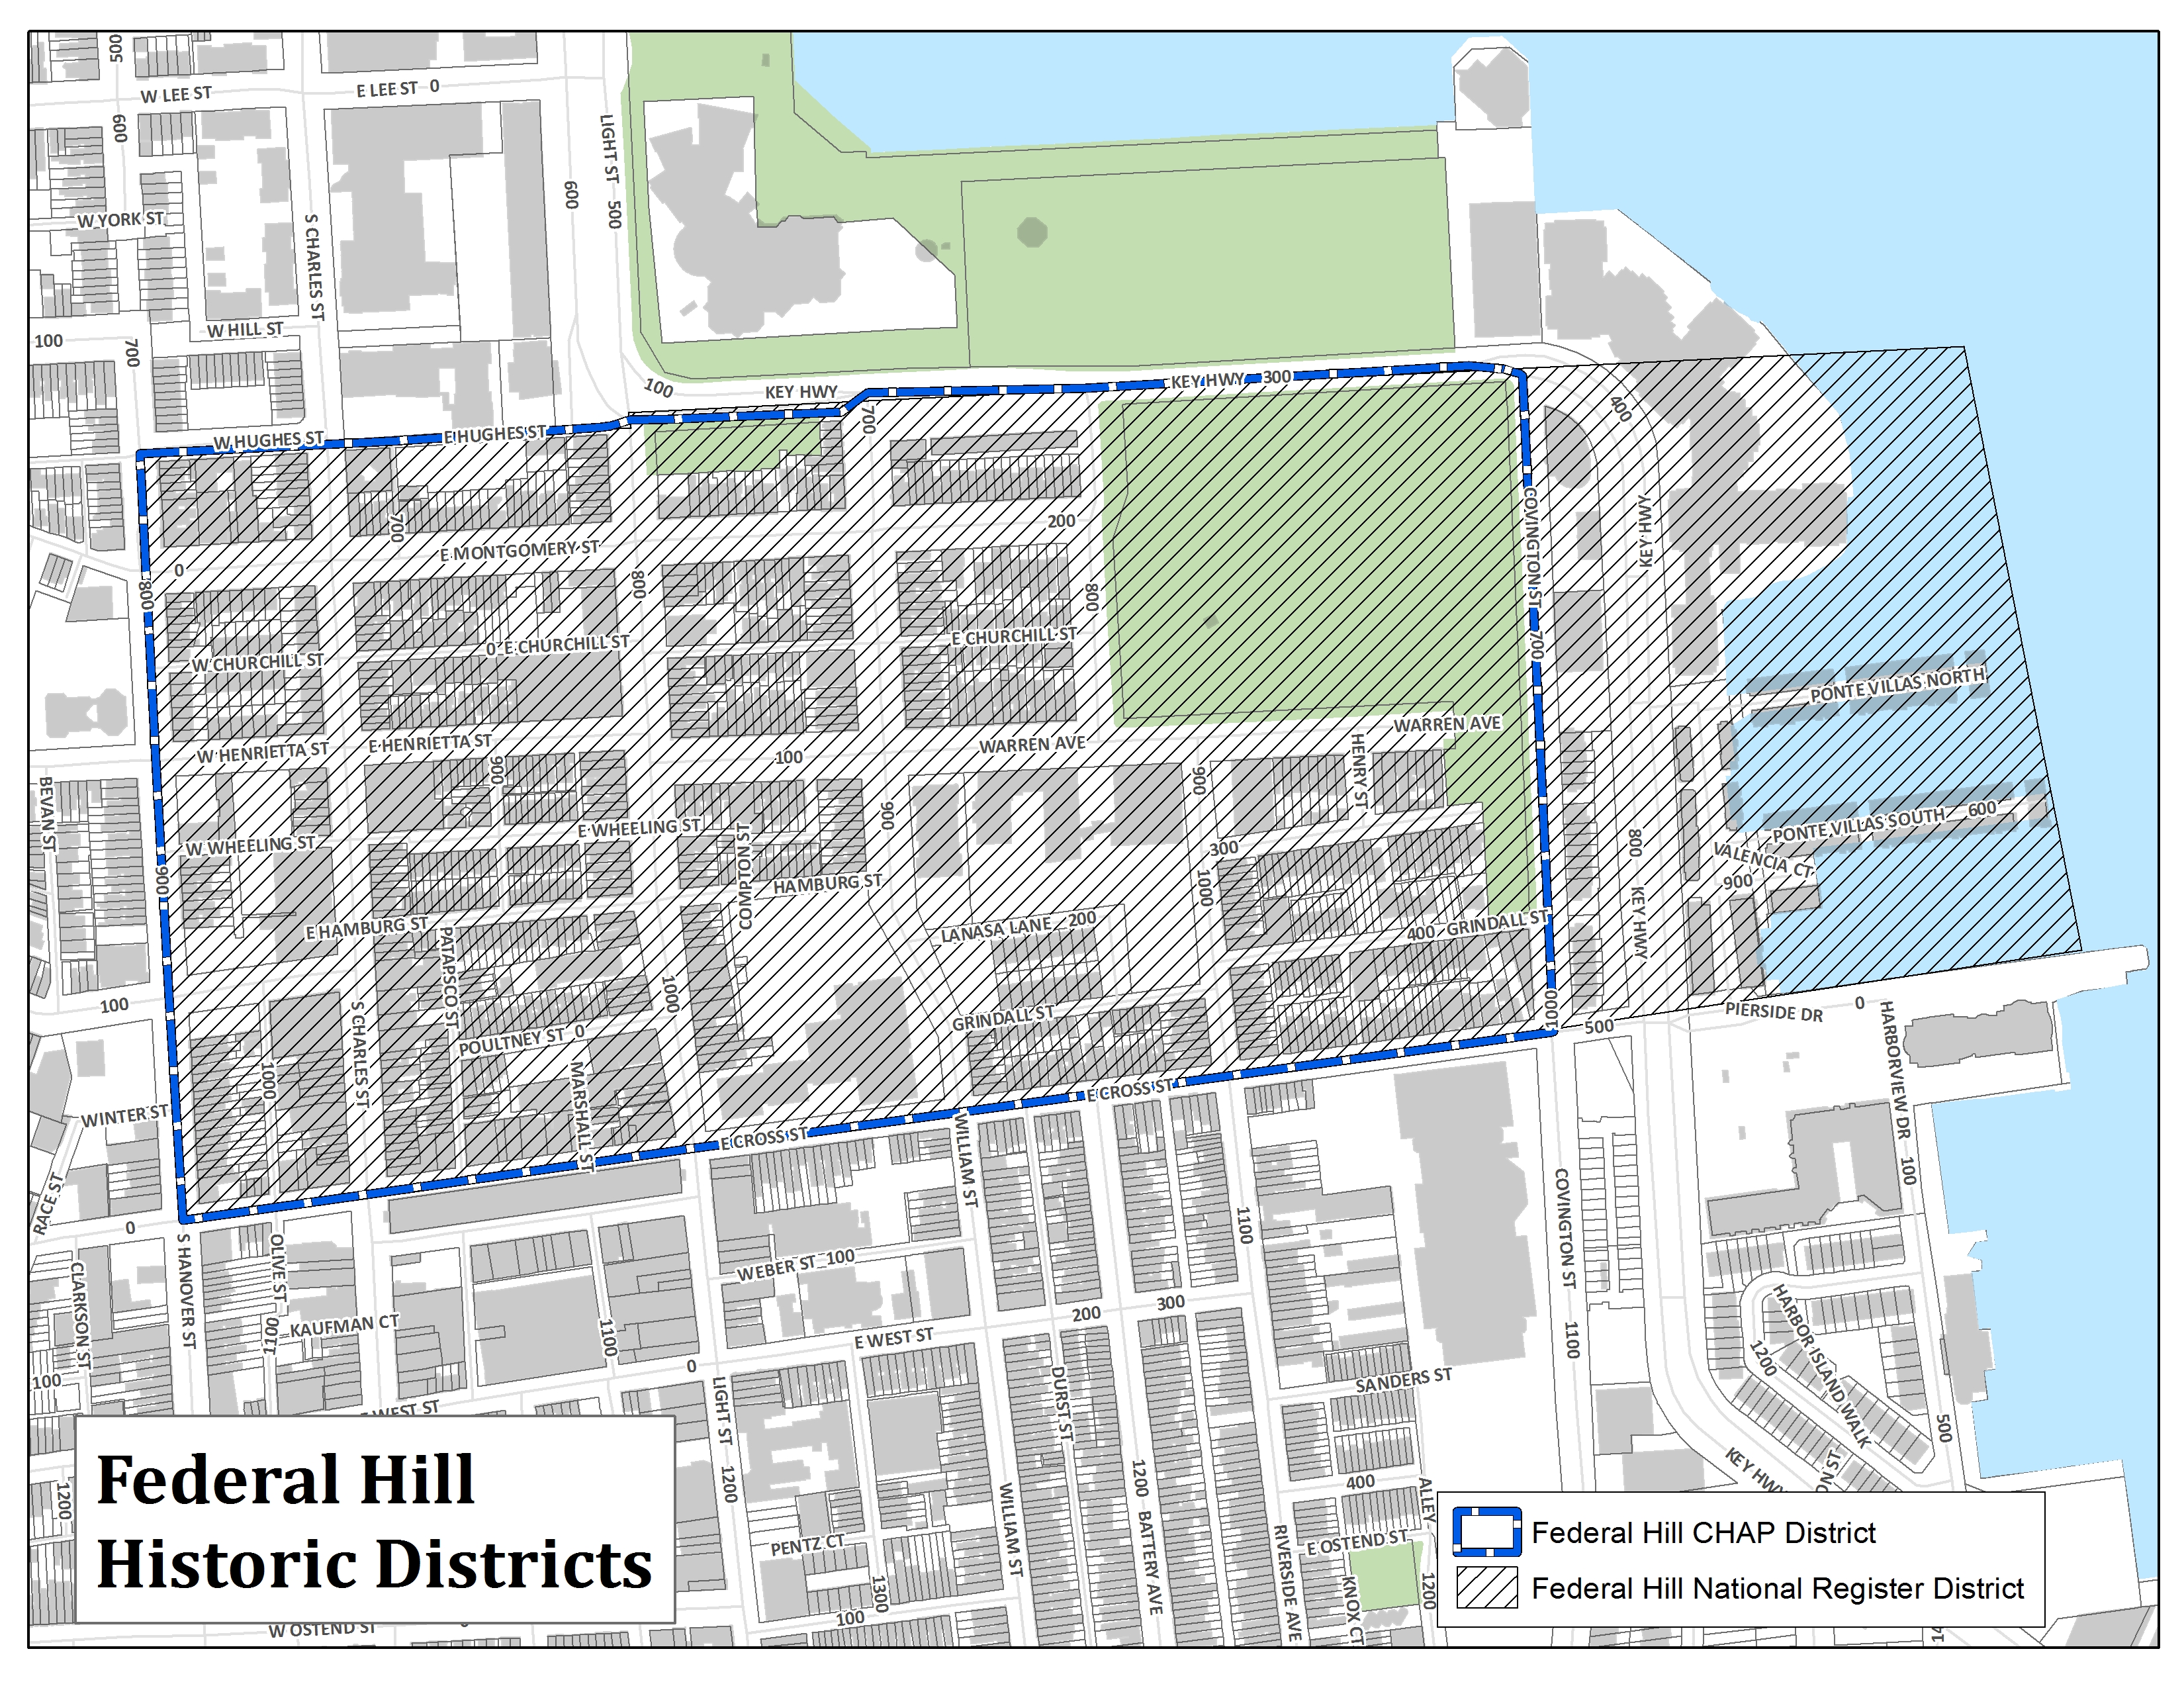 Federal Hill Historic Districts